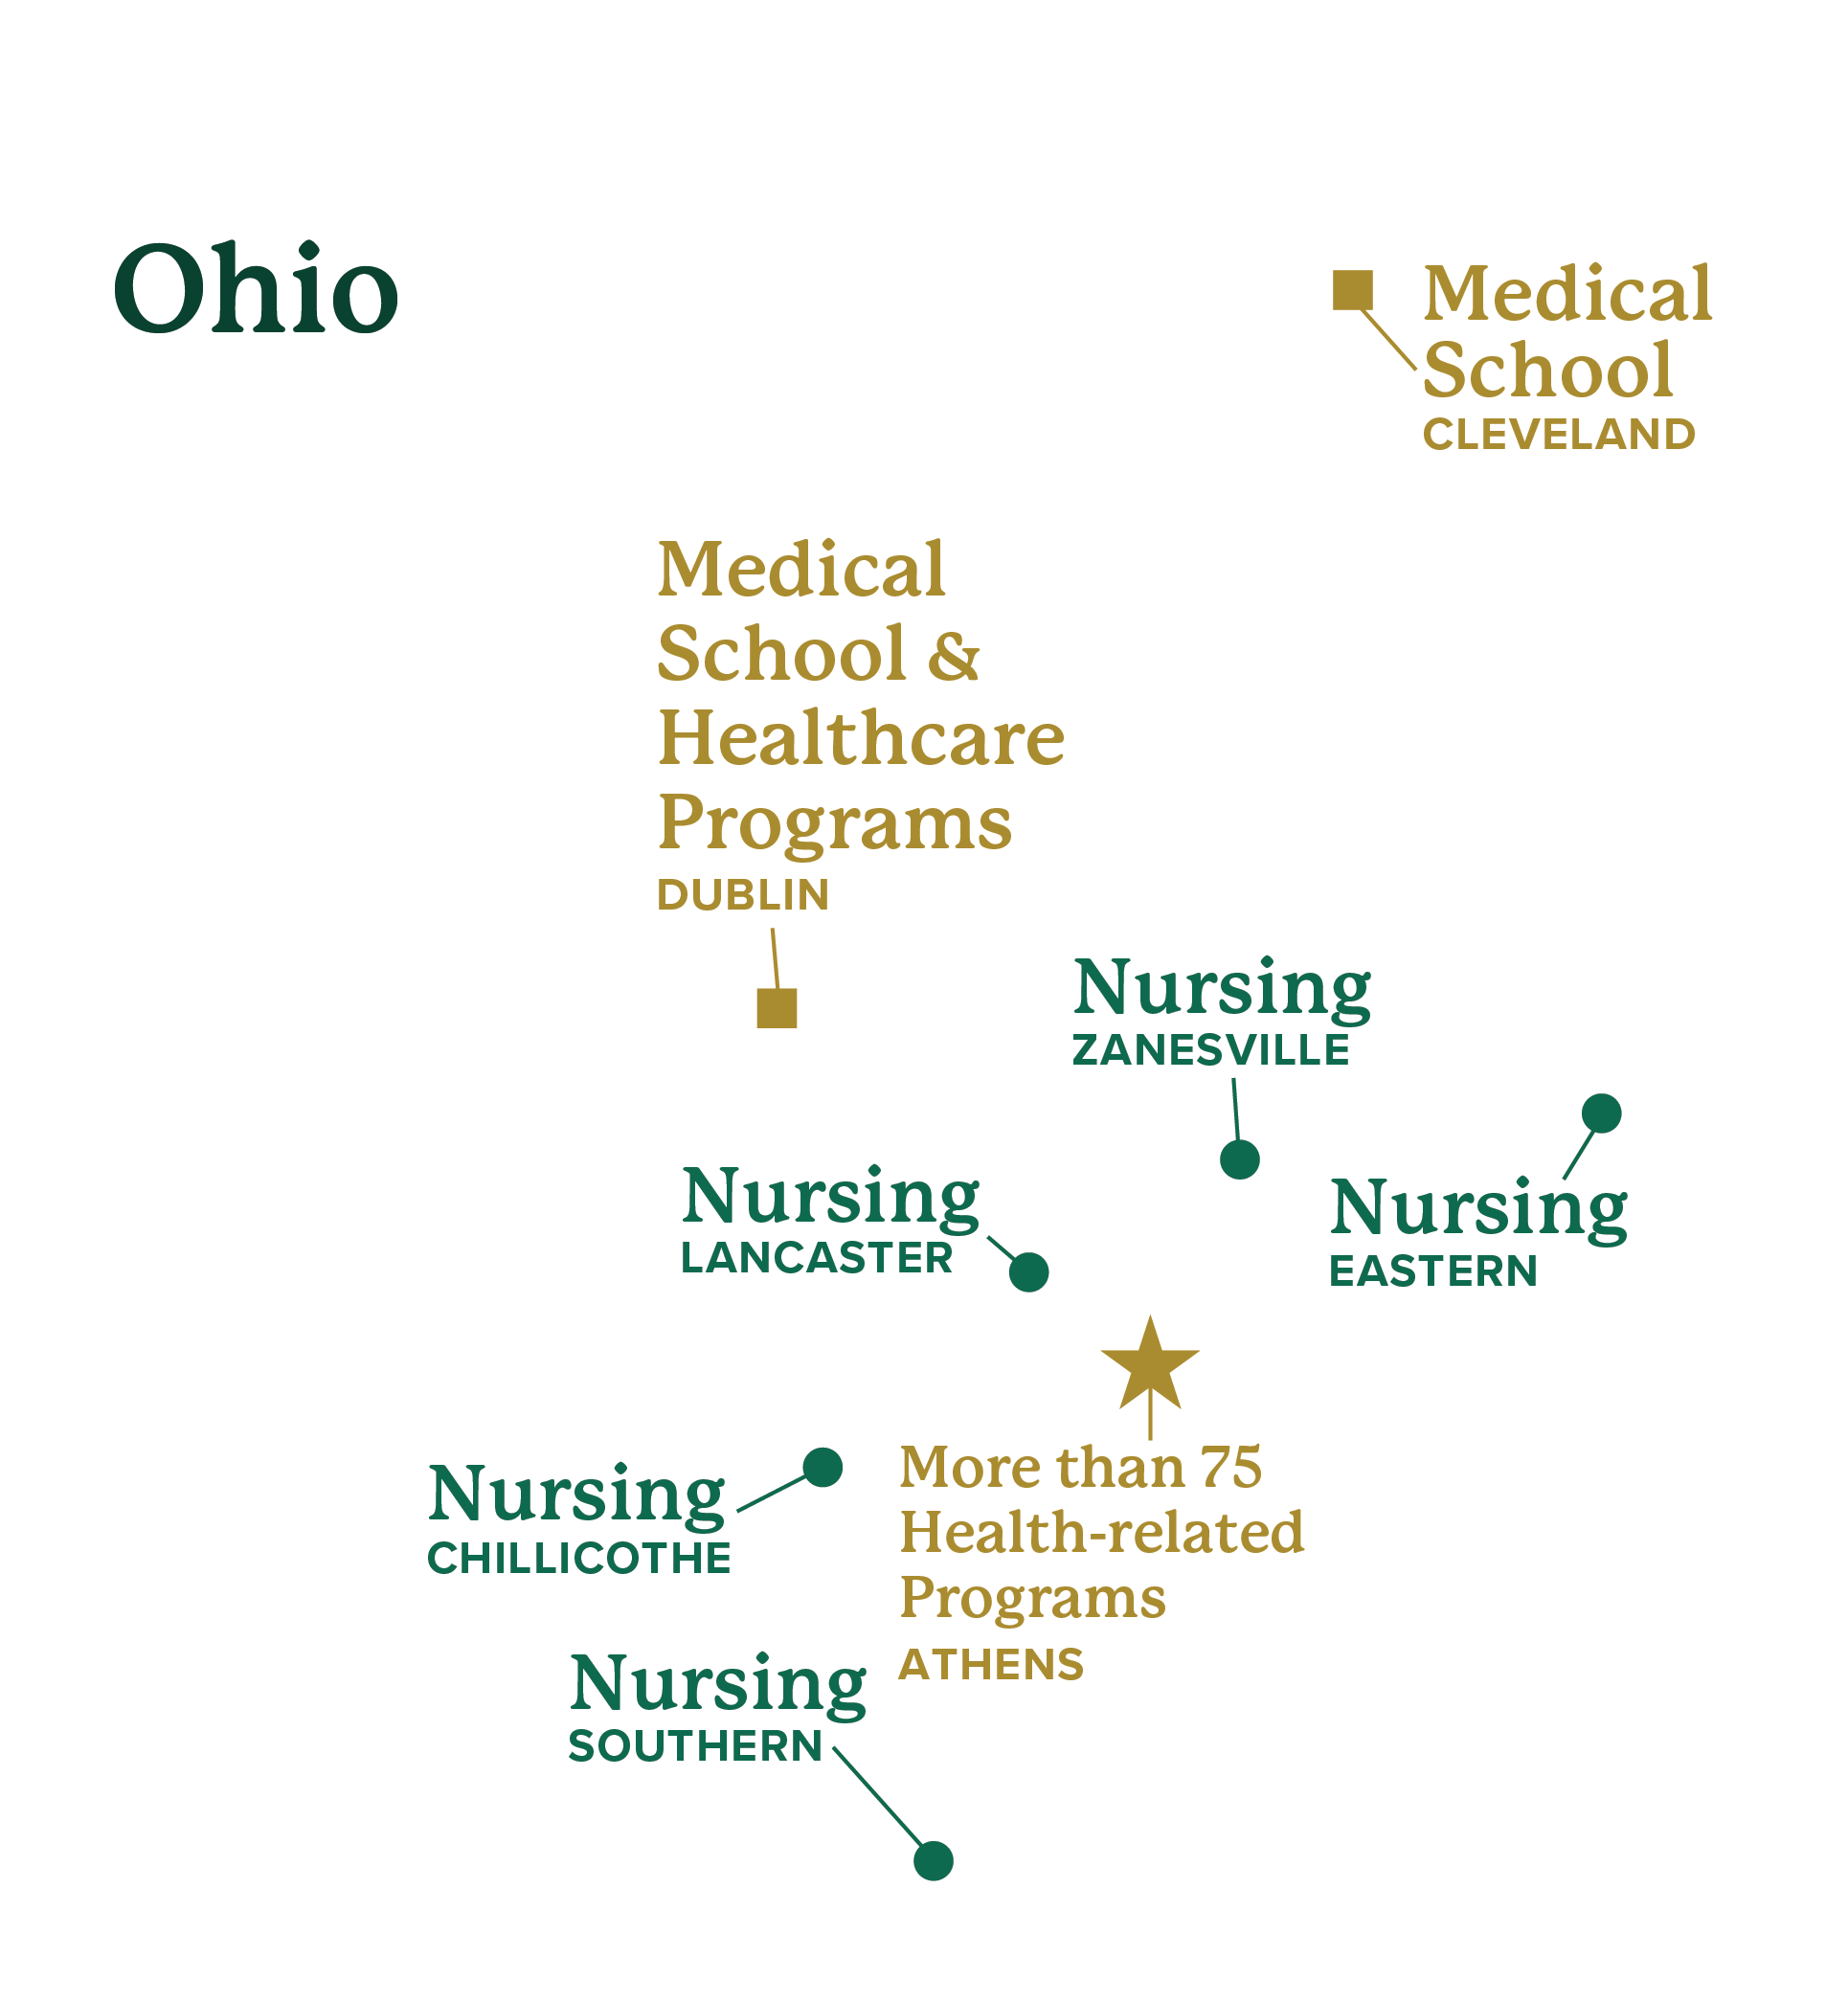 Map of the state of Ohio with Nursing marked in Lancaster, Chillicothe, Southern, Eastern and Zanesville. Medical school is noted at Cleveland. Medical school and healthcare programs at Dublin. 